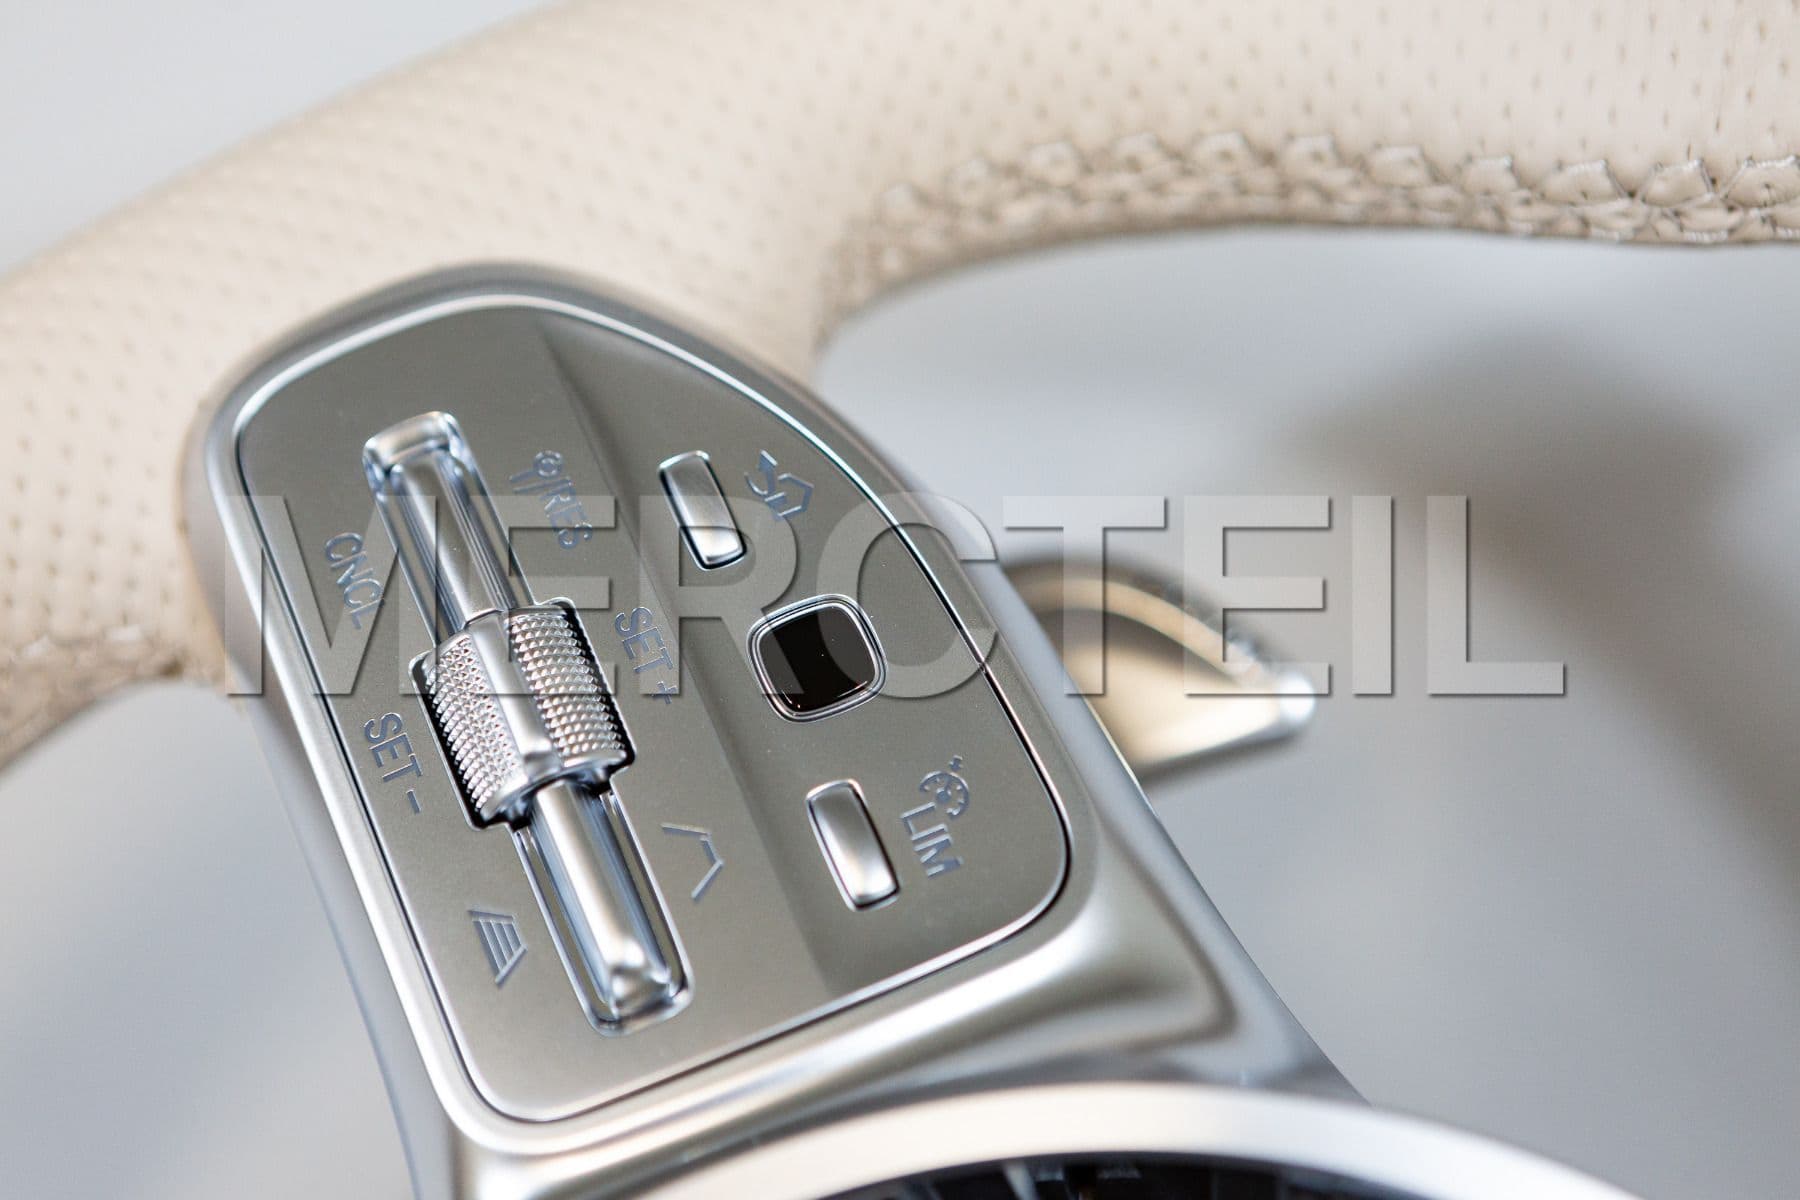 AMG Beige Leather Steering Wheel for S Class, Coupe; A00046099088R85, A0004609908.